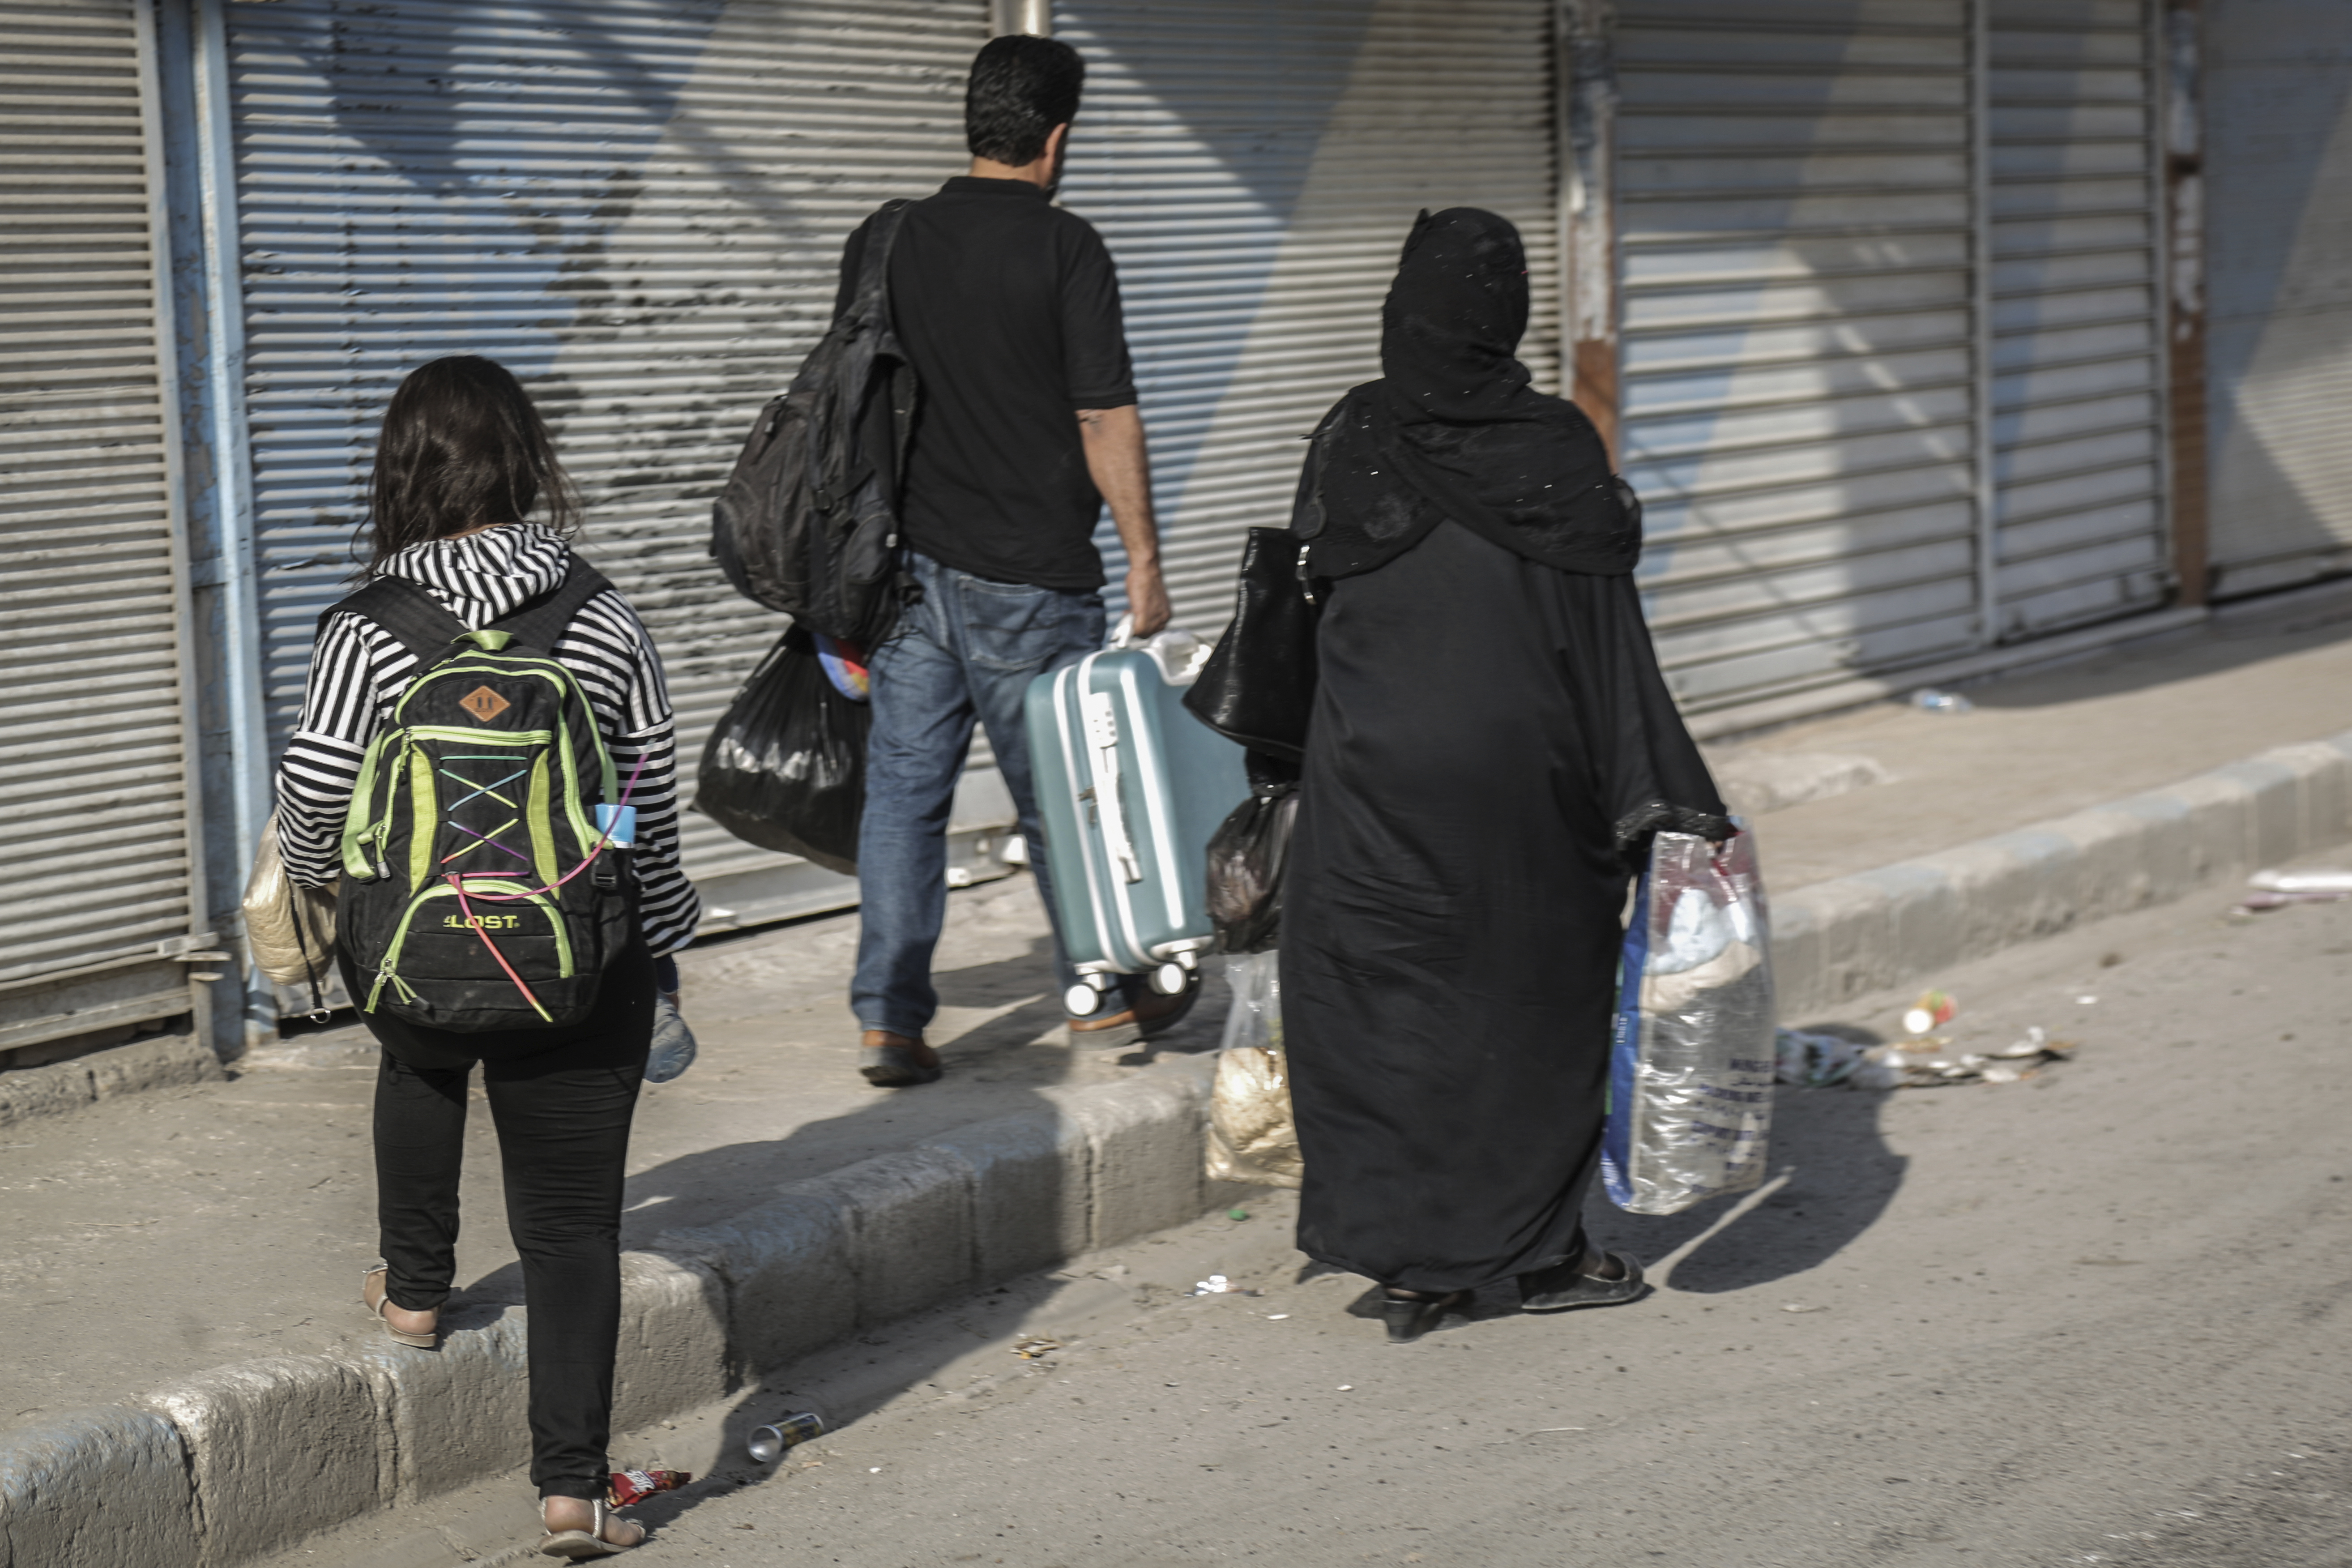 14 October 2019, Syria, Tell Abiad: Residents flee from the fighting. Photo by: Anas Alkharboutli/picture-alliance/dpa/AP Images